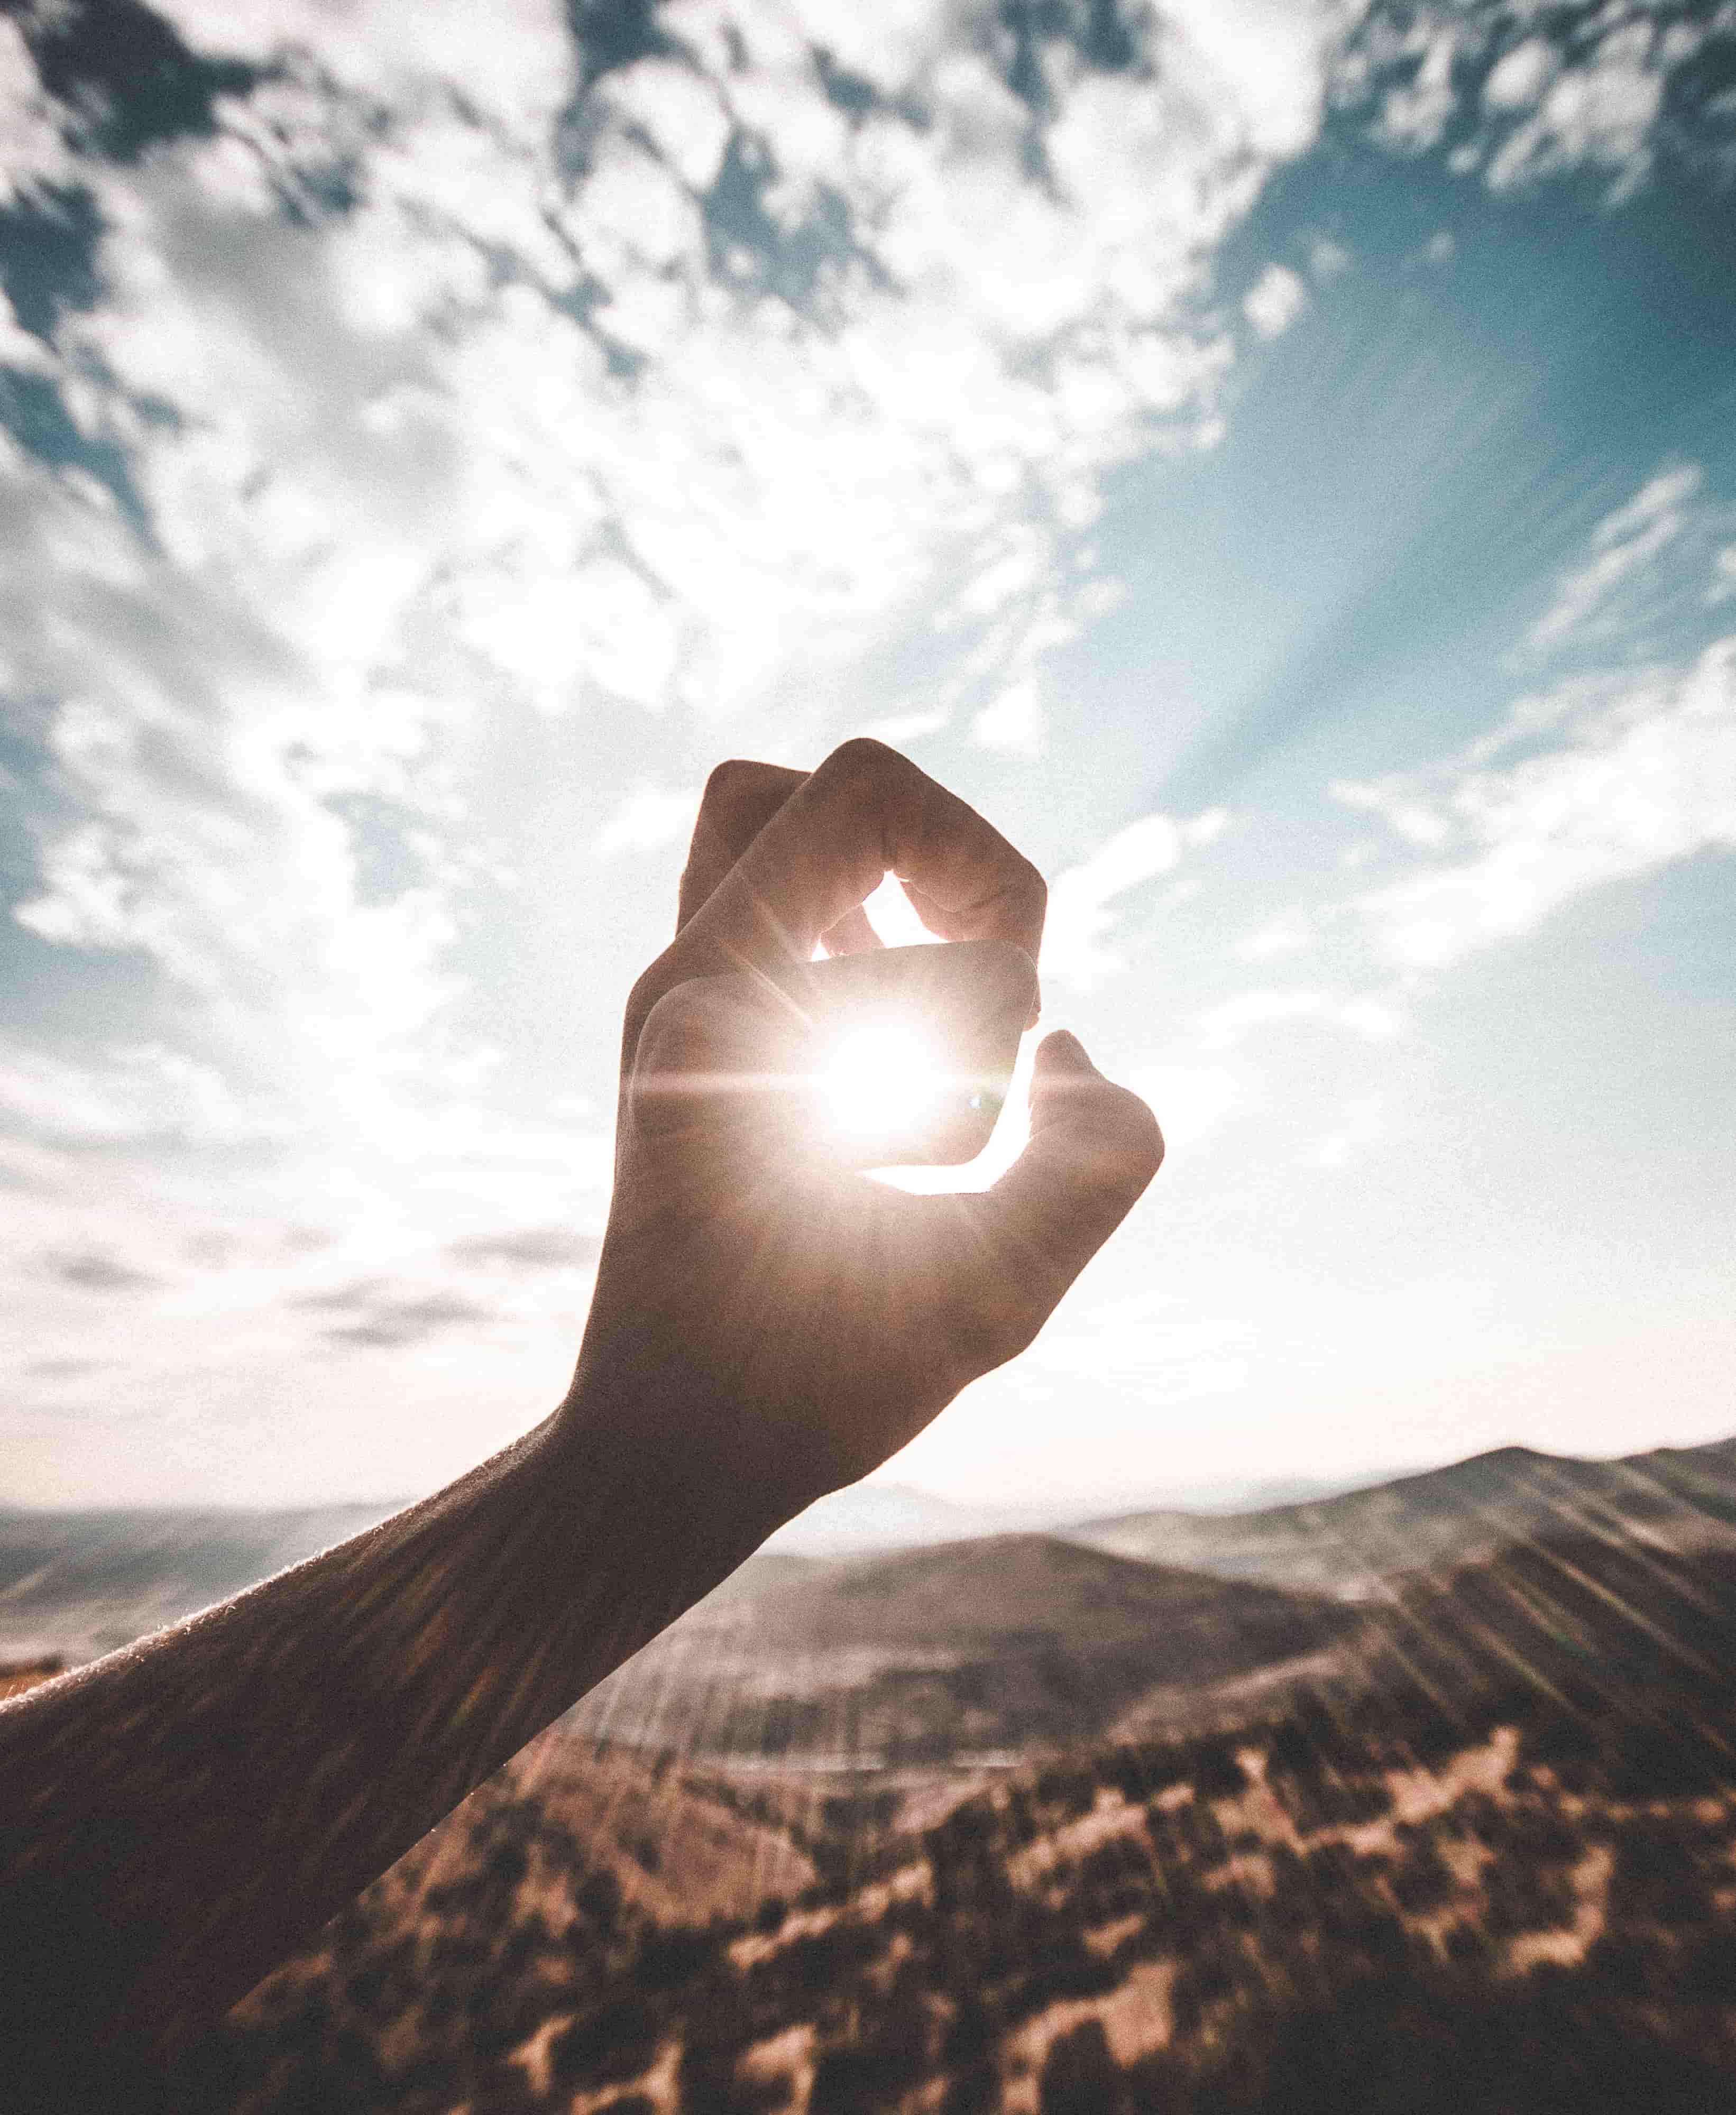 silhouette of human hand capturing sun in the center